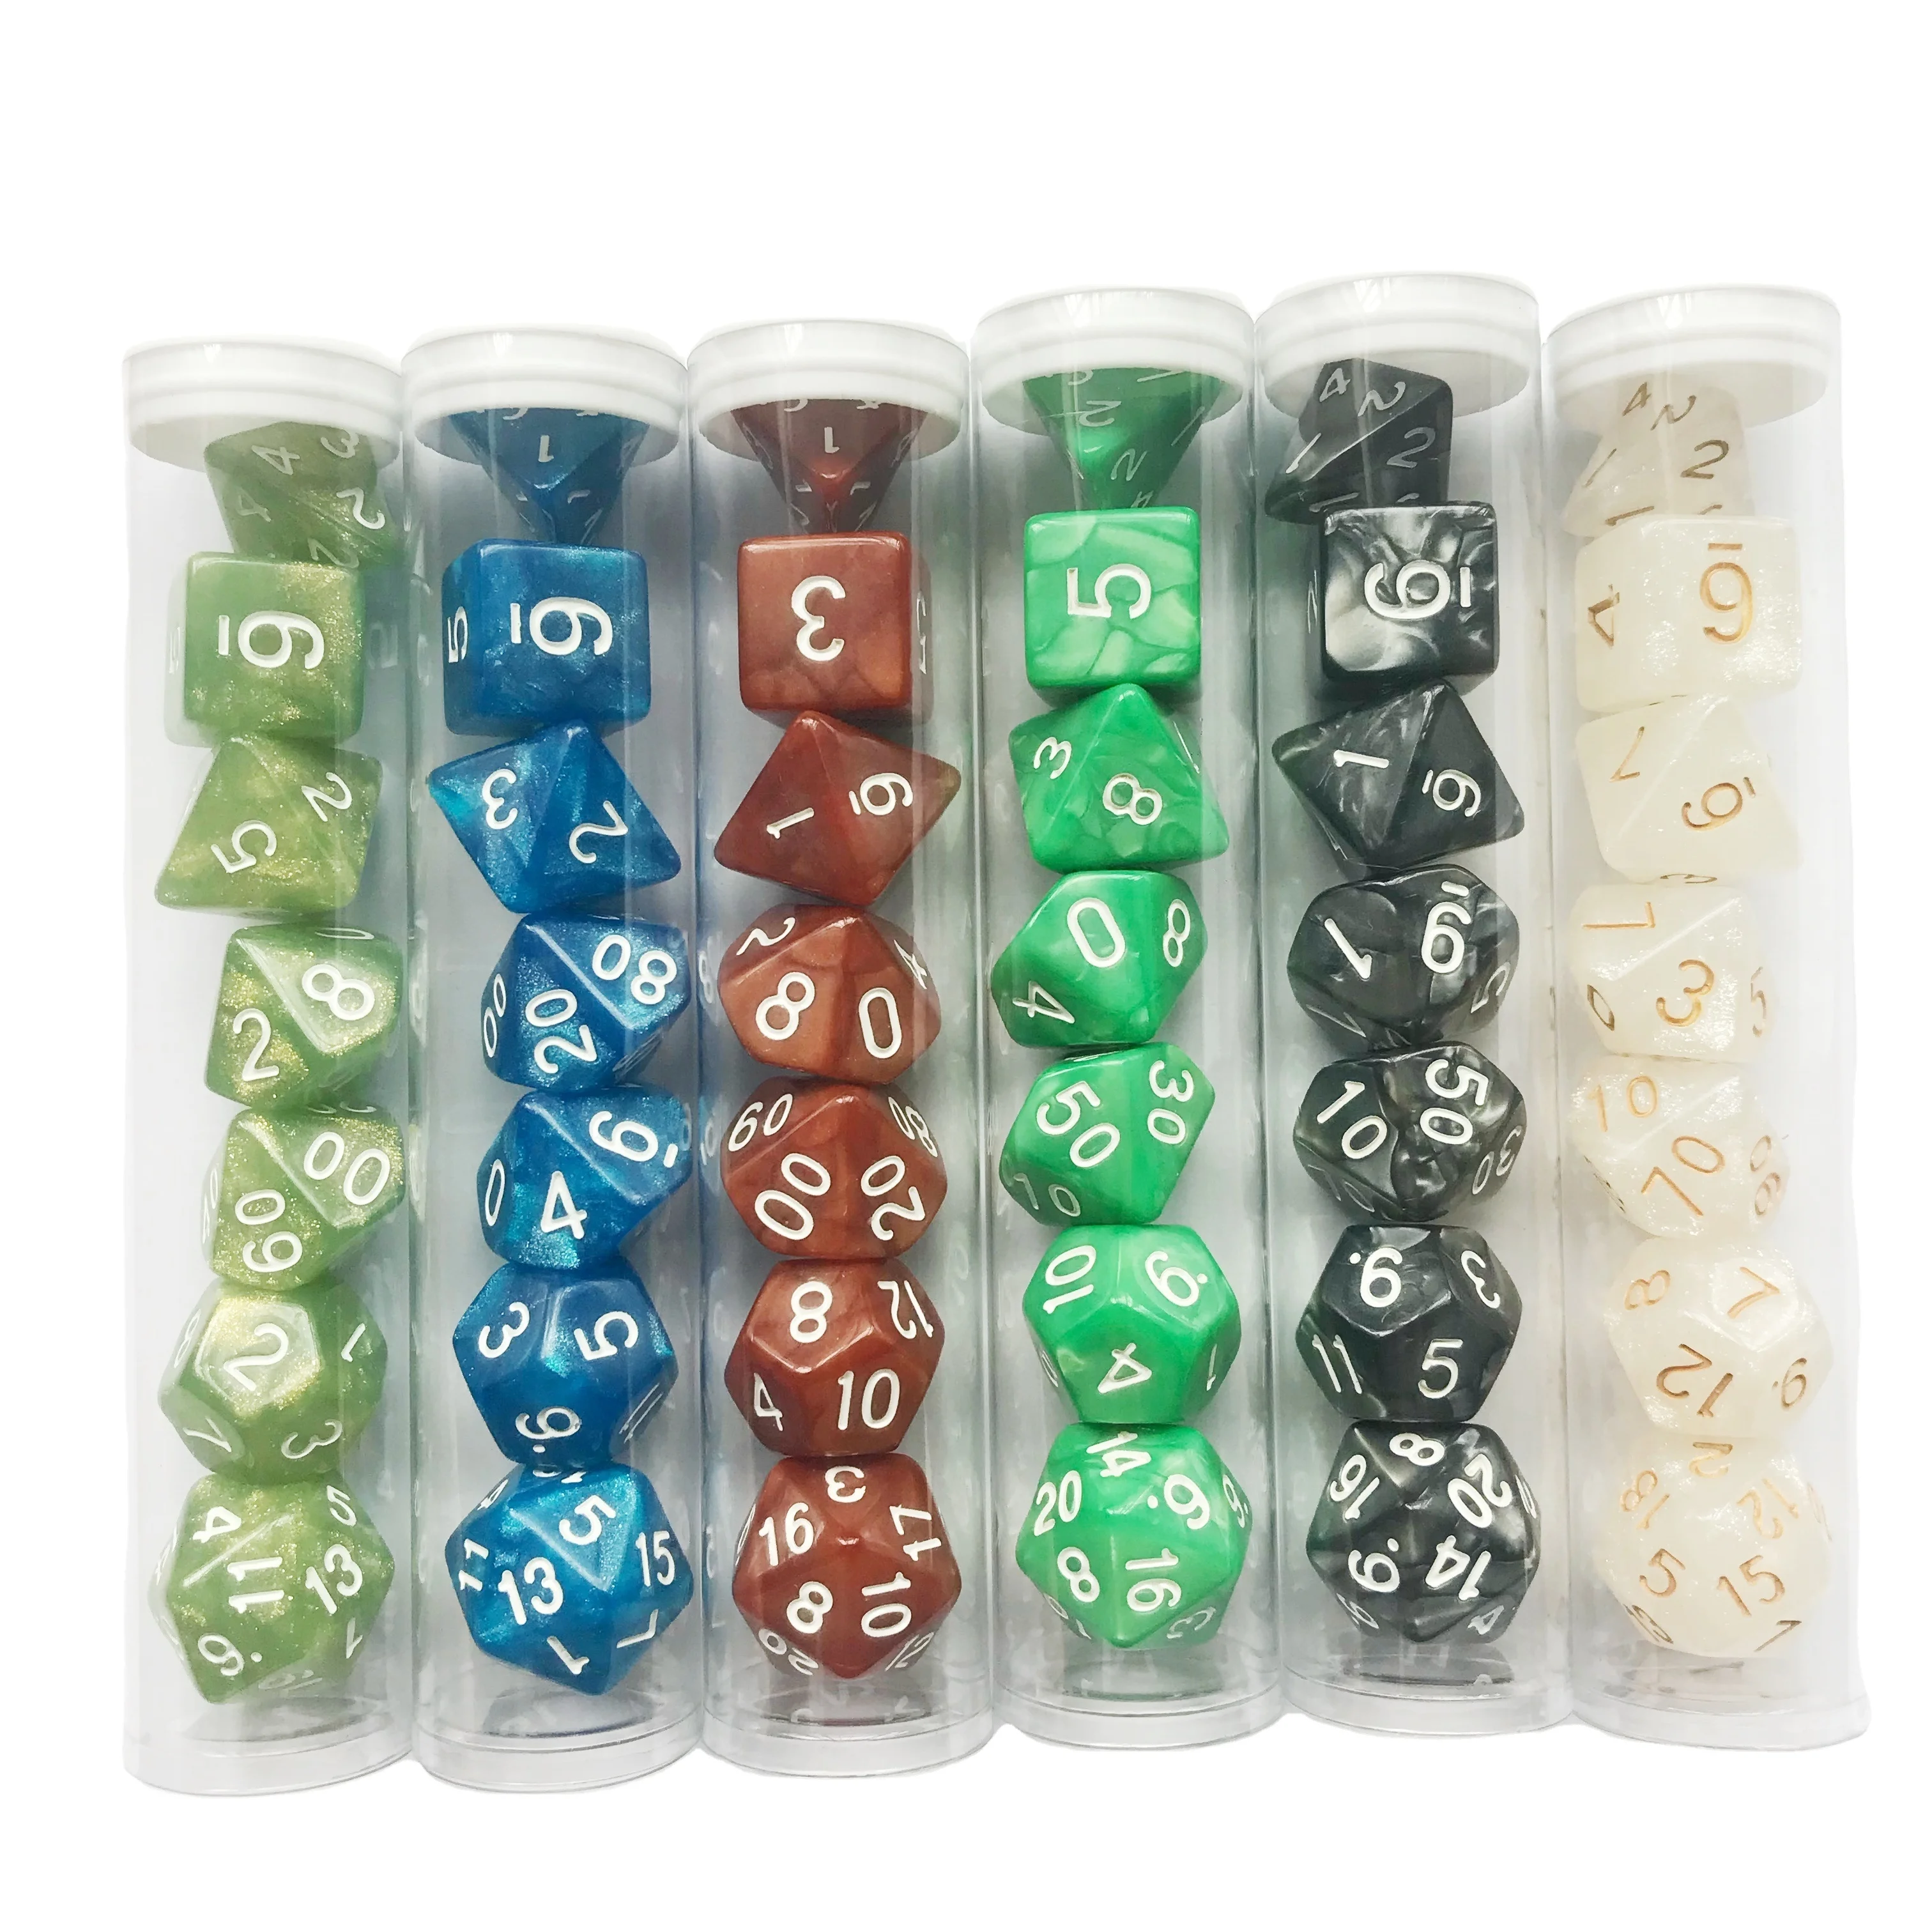 

7 pcs/set Desk Polyhedral Custom Dice 4/6/8/10/12/20 Pear DND Acrylic dice set in Tube Packaging or dice bag Multi Side Gaming, Color